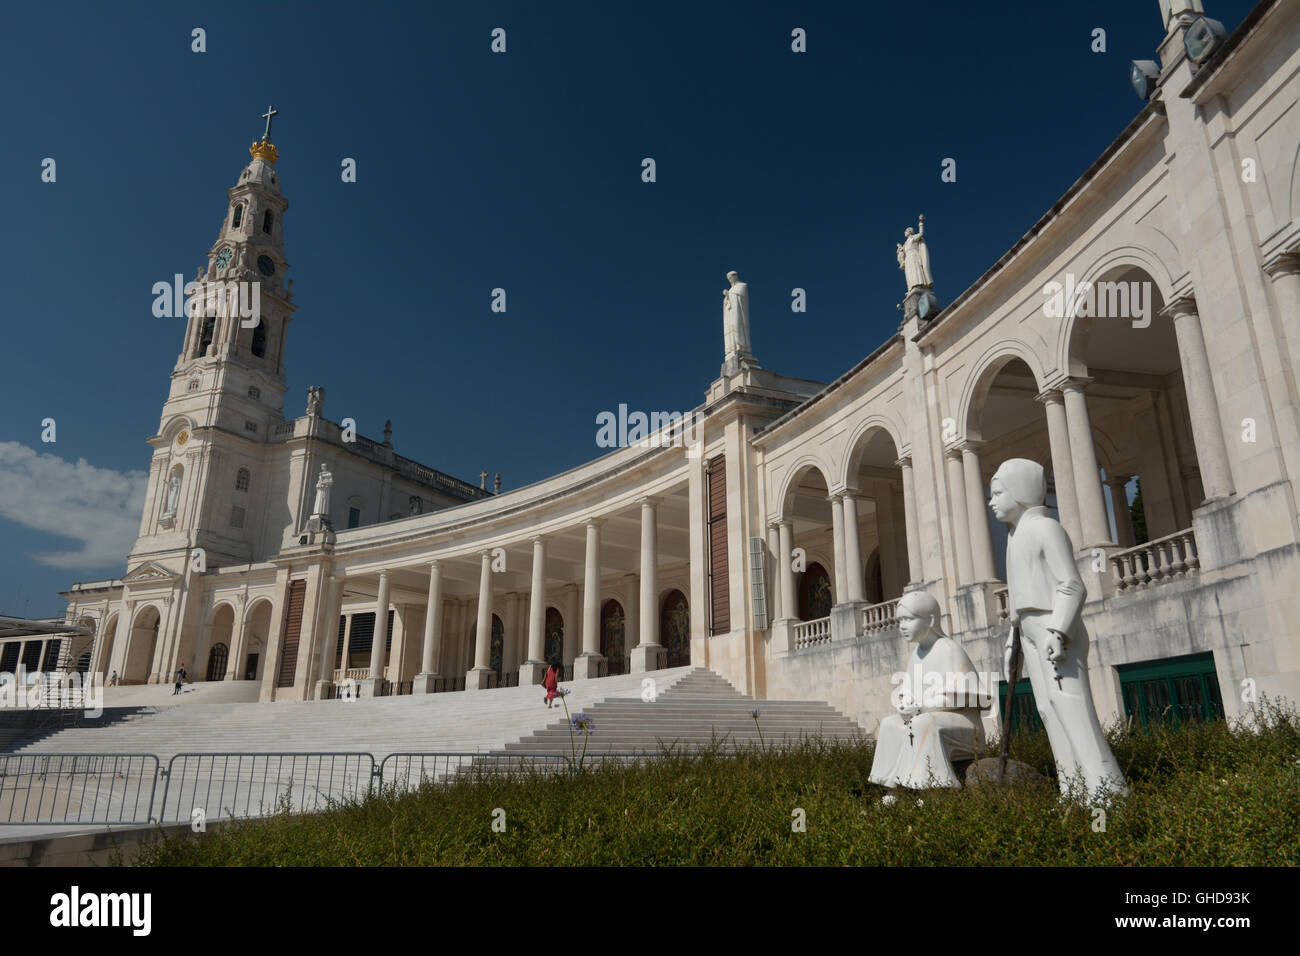 Portugal, Sanctuary of Fatima (Santuário de Fátima), the Basilica of Our Lady of the Rosary with the statue of shepherd children Stock Photo